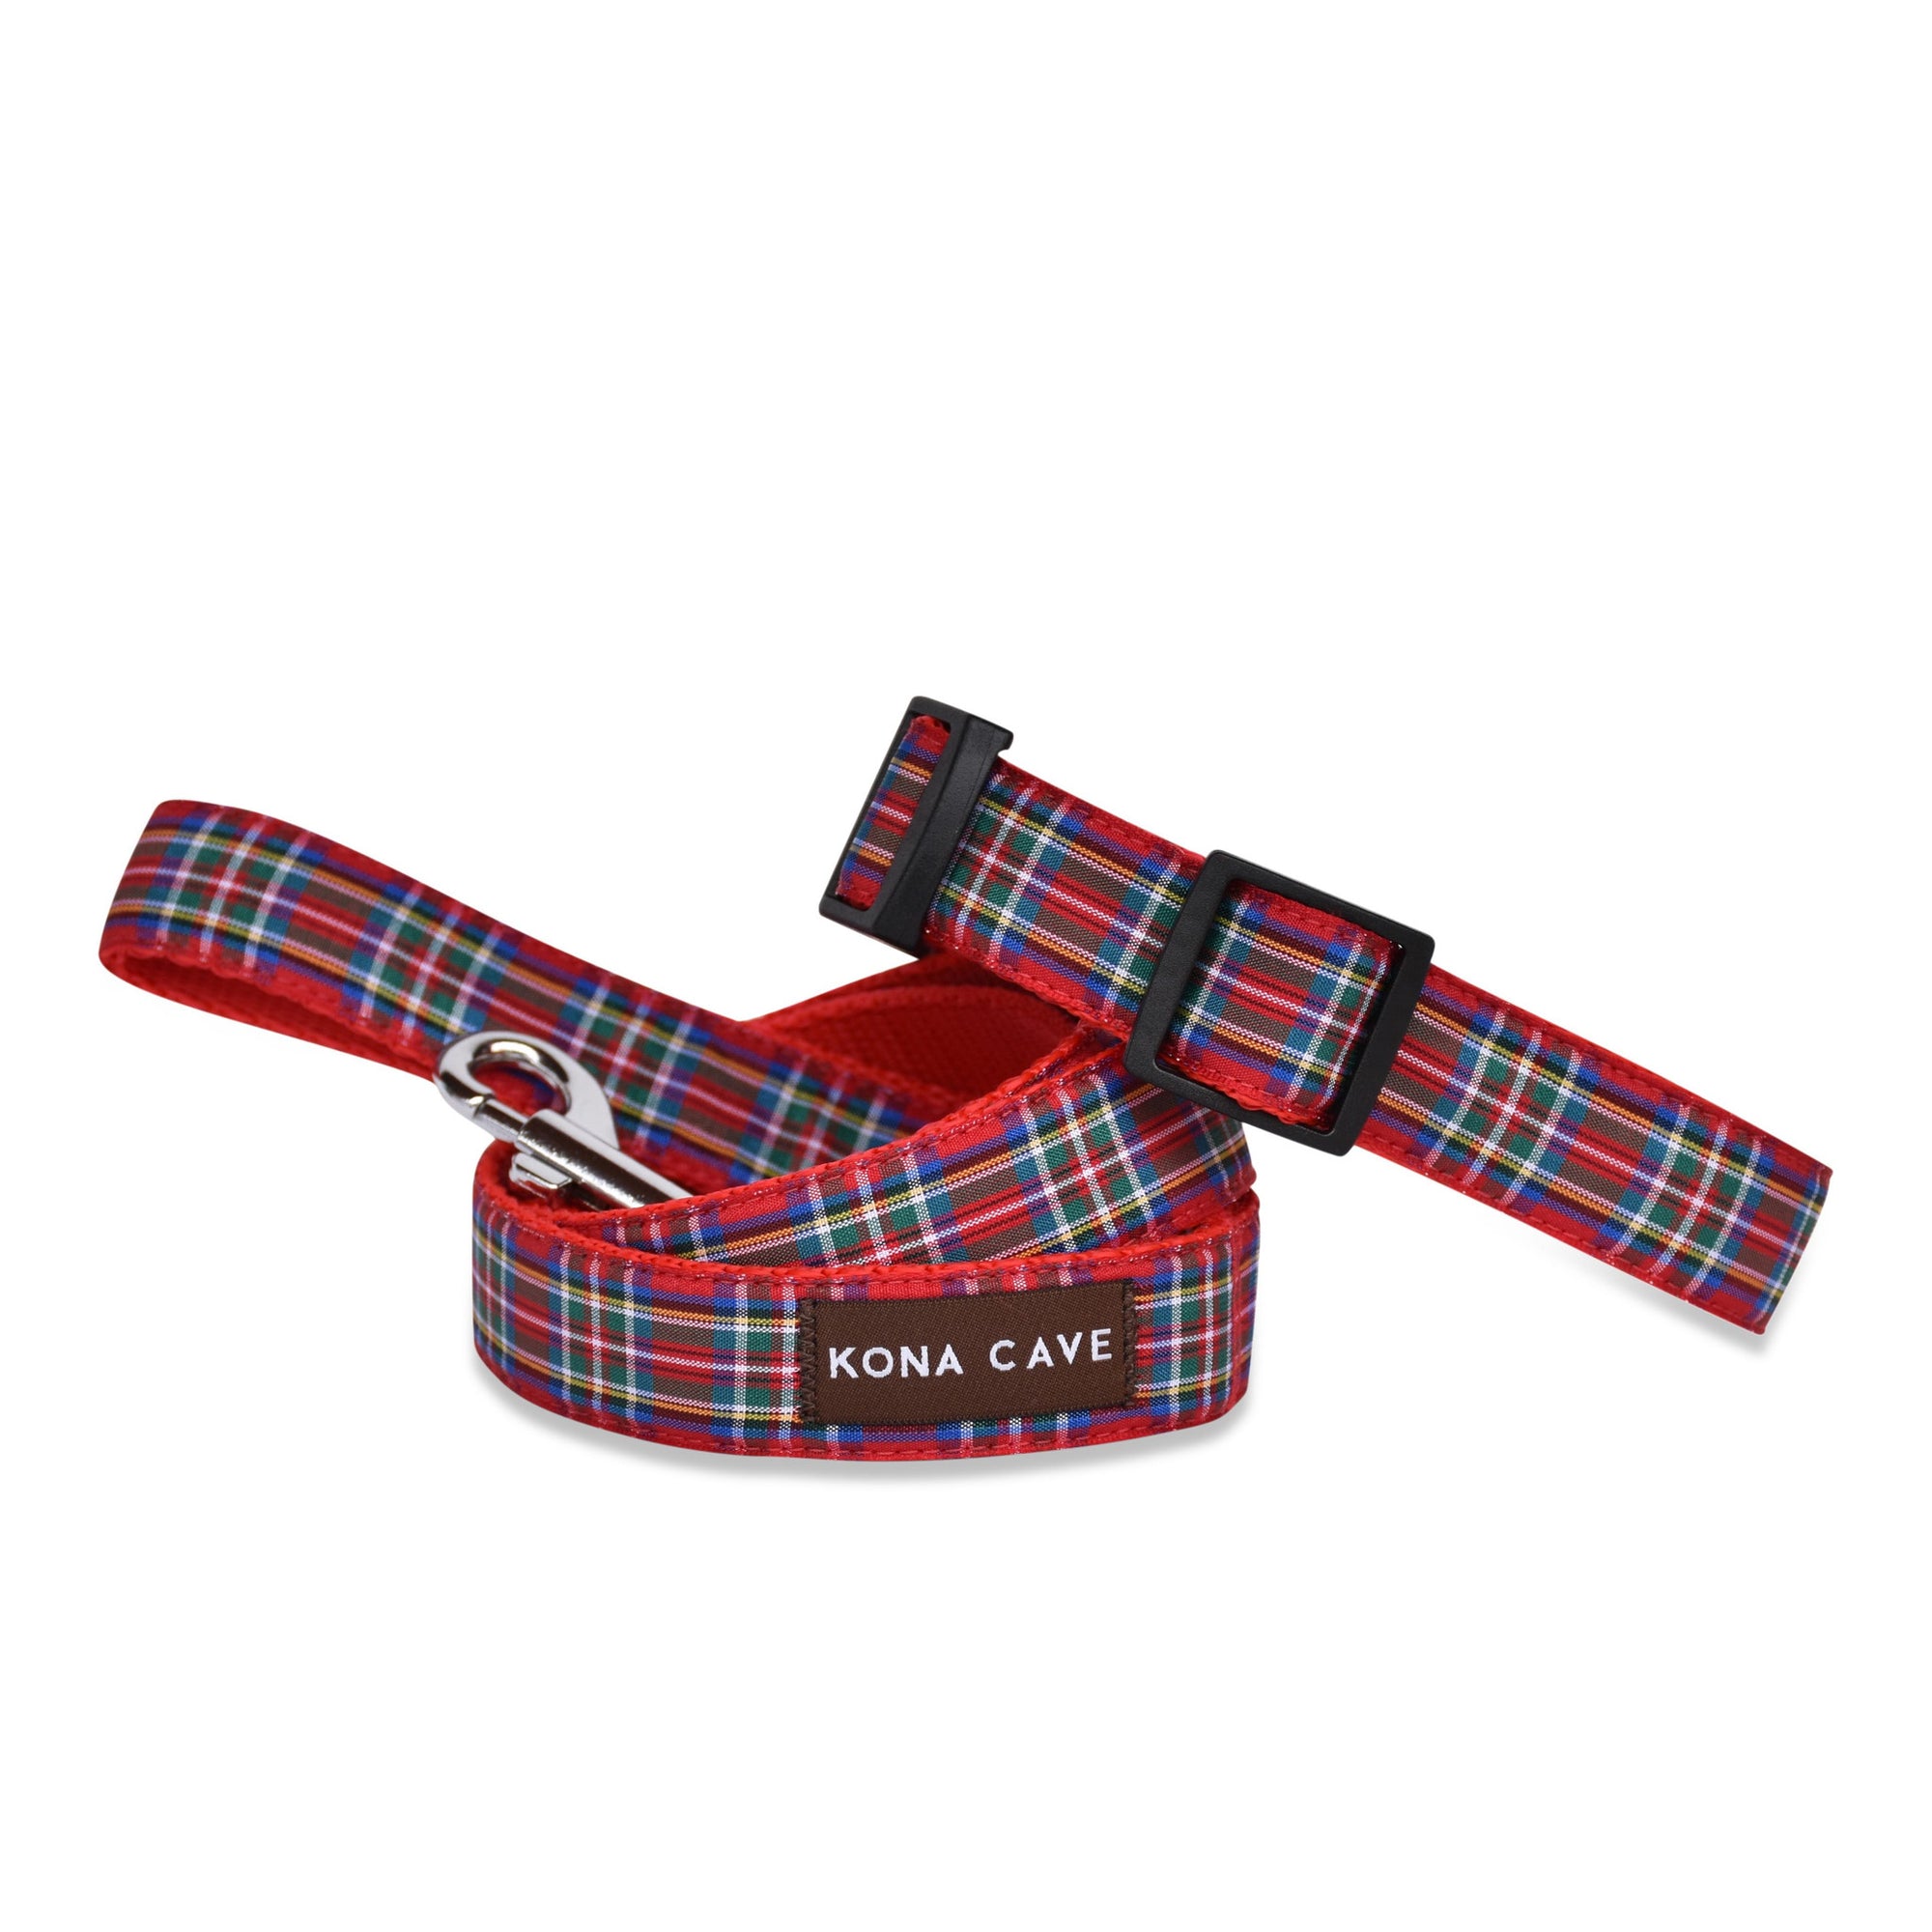 KONA CAVE ® - adjustable dog collar and leash in authentic Royal Stewart tartan (red)